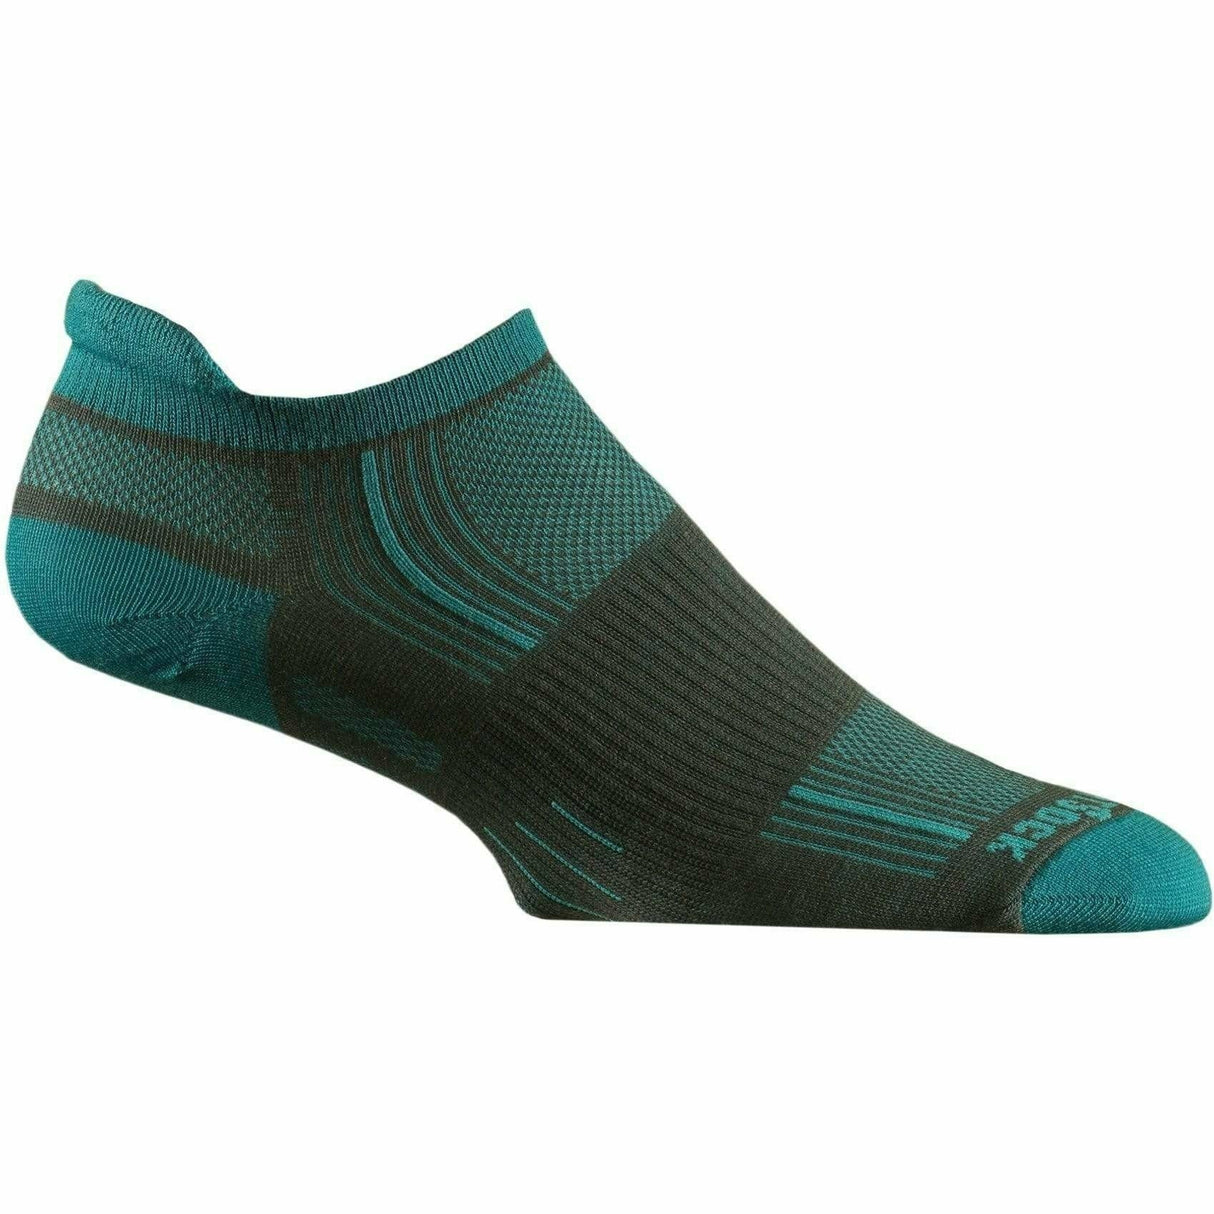 Wrightsock Double-Layer Stride Tab Socks  -  Small / Ash/Turquoise